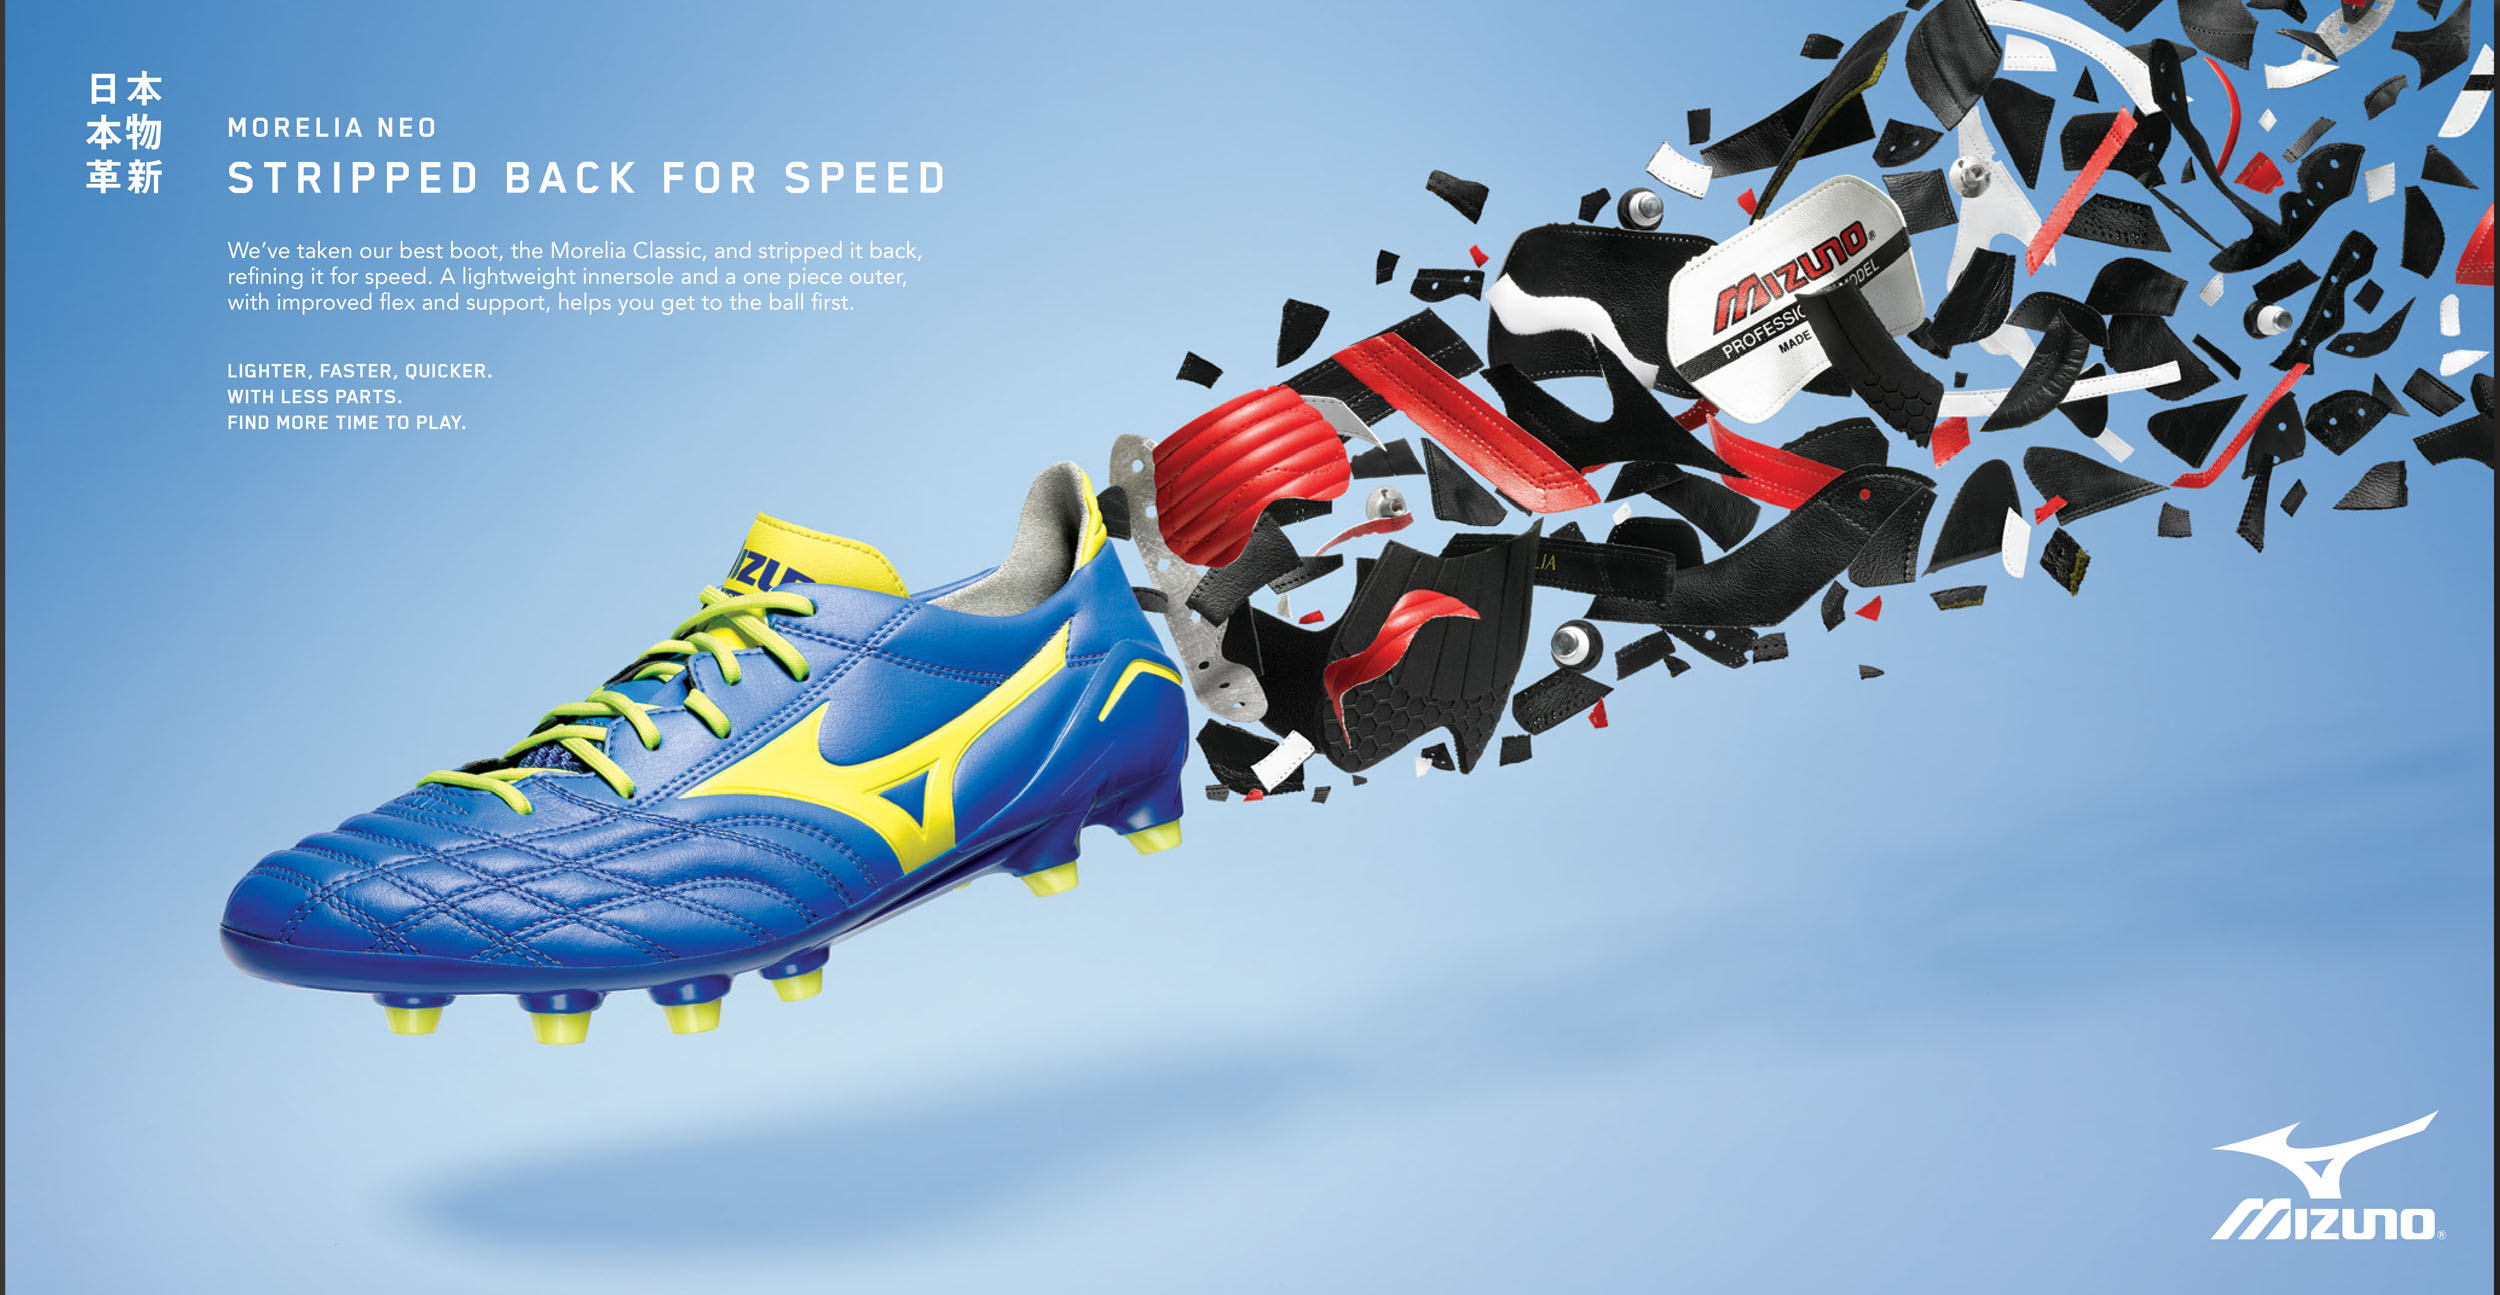 Mizuno football boots by Alexander Kent London based still life and product photographer.